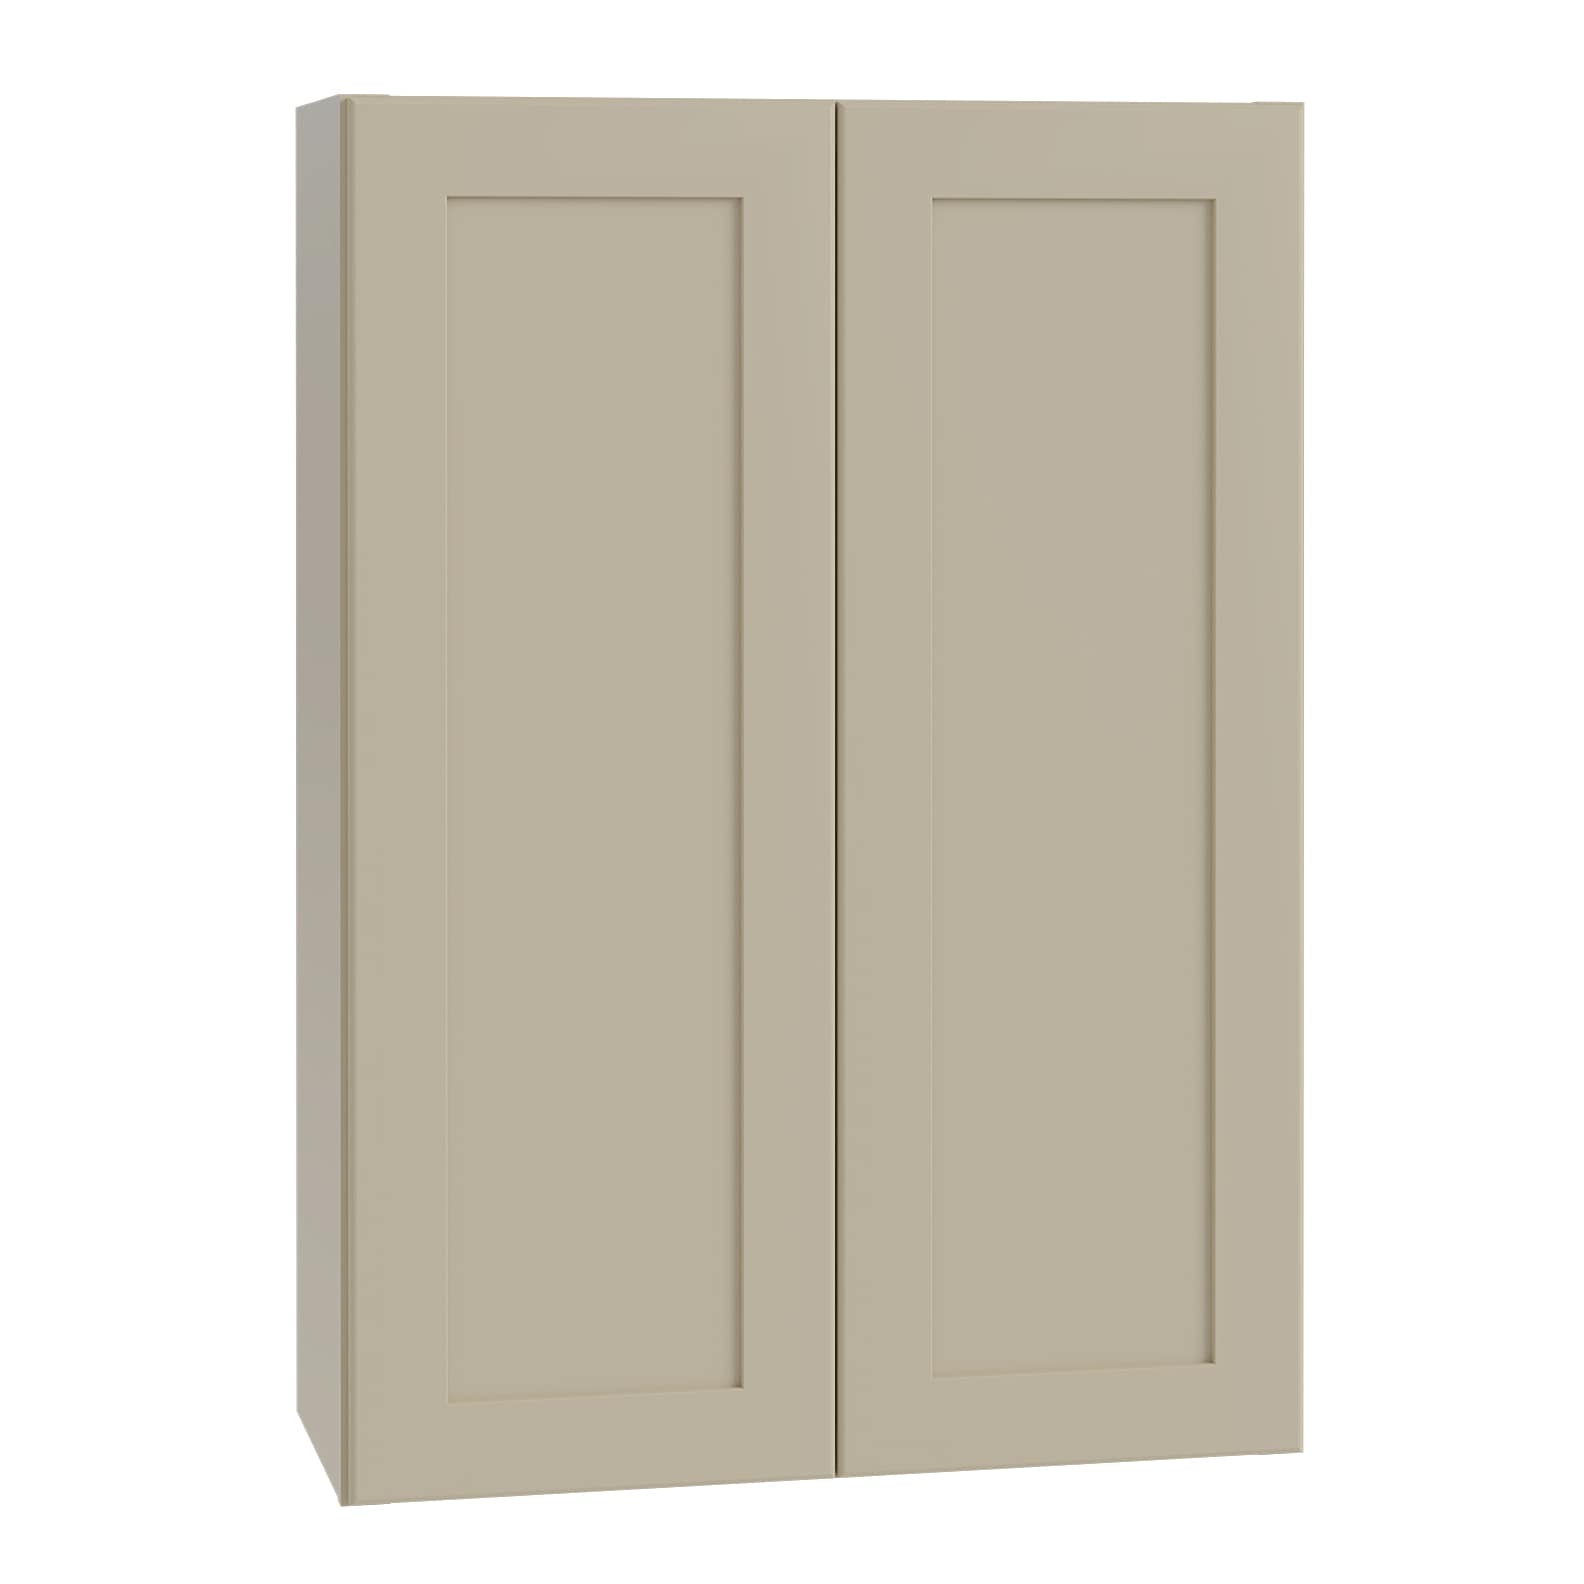 Luxxe Cabinetry 24-in W x 36-in H x 12-in D Norfolk Blended Cream Painted Door Wall Fully Assembled Semi-custom Cabinet in Off-White | W2436-NBC